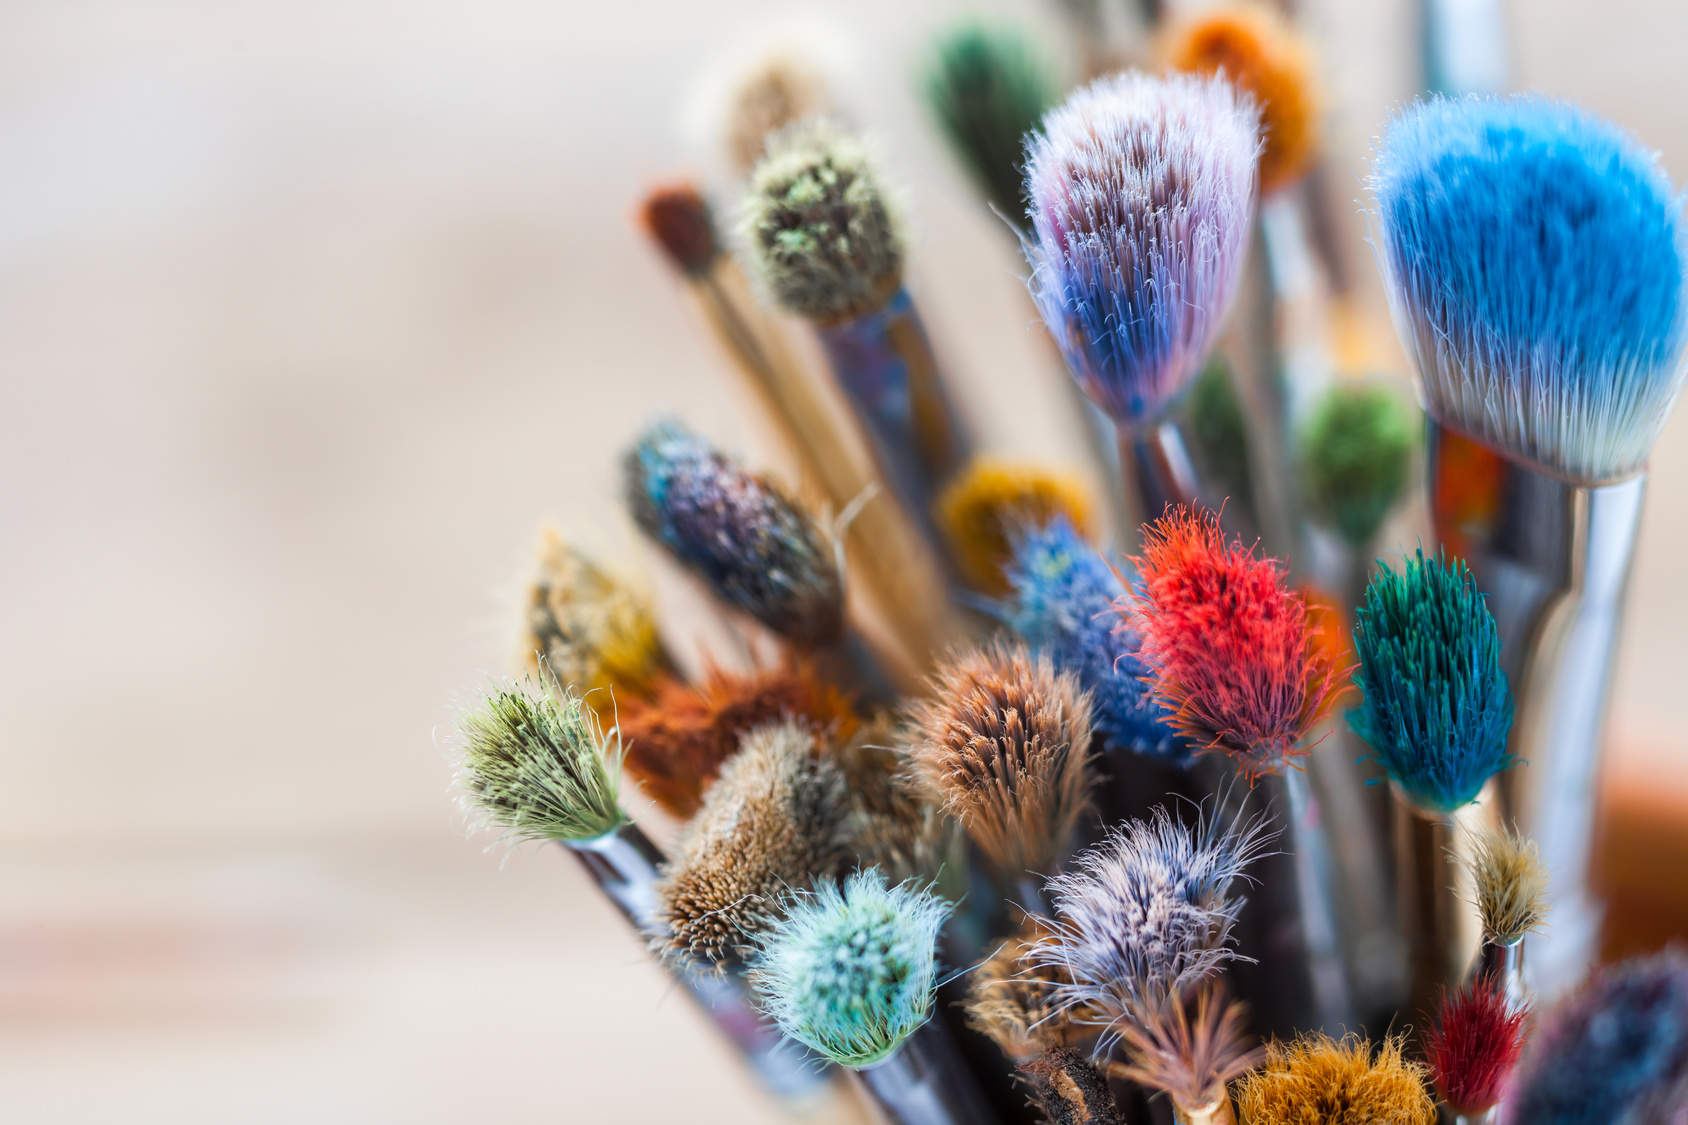 bunch of paint brushes